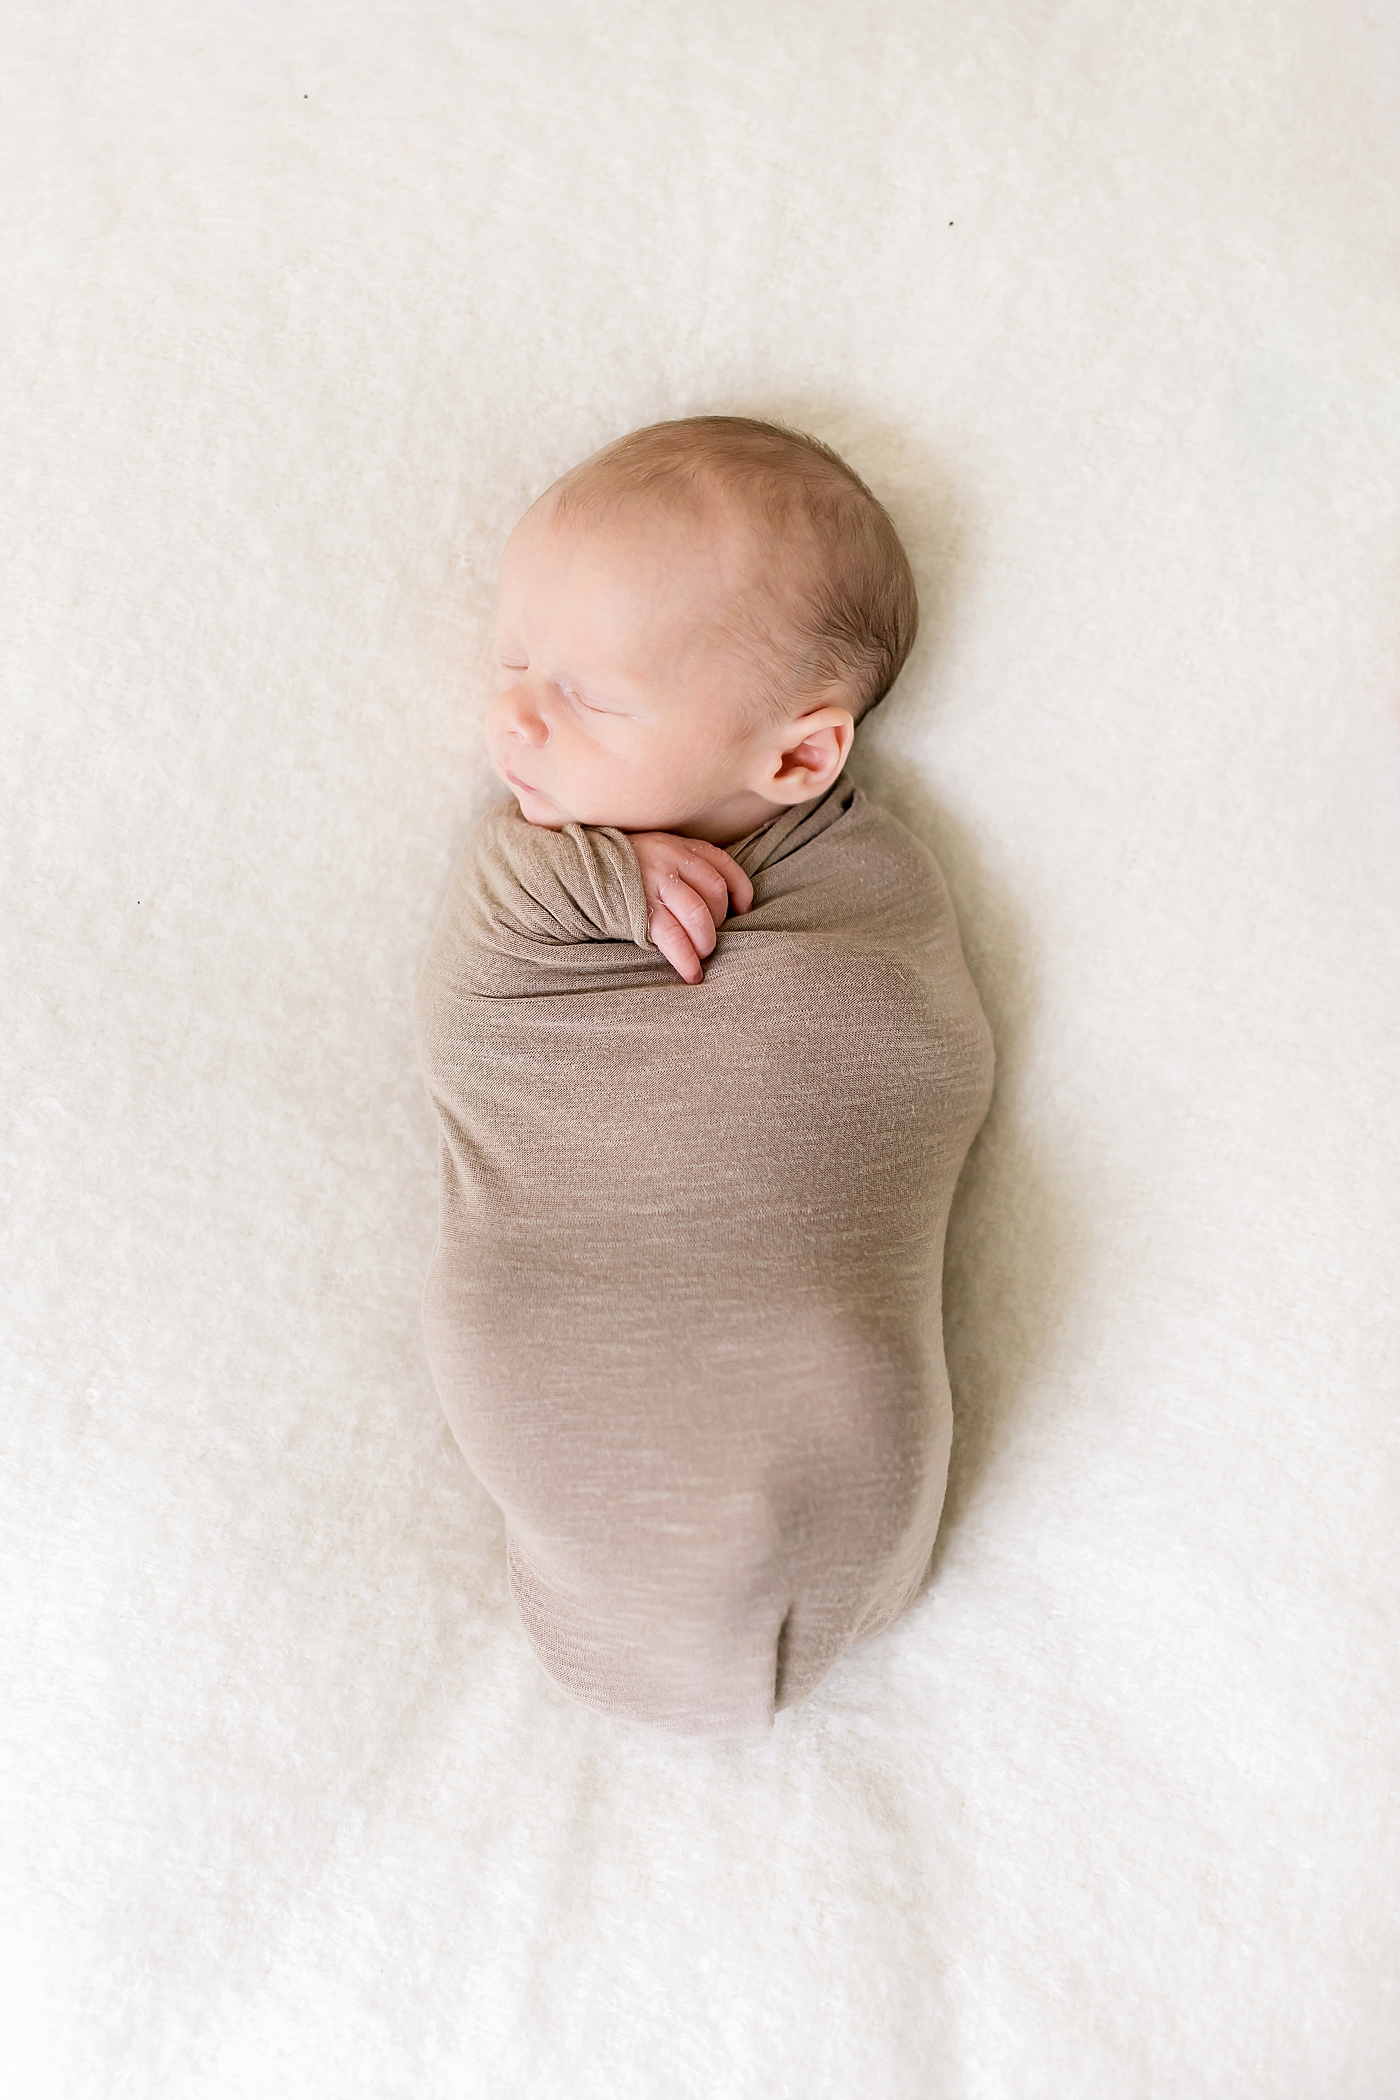 Baby boy sleeping wrapped in brown swaddle | Photo by Charlotte NC Newborn Photographer Anna Wisjo